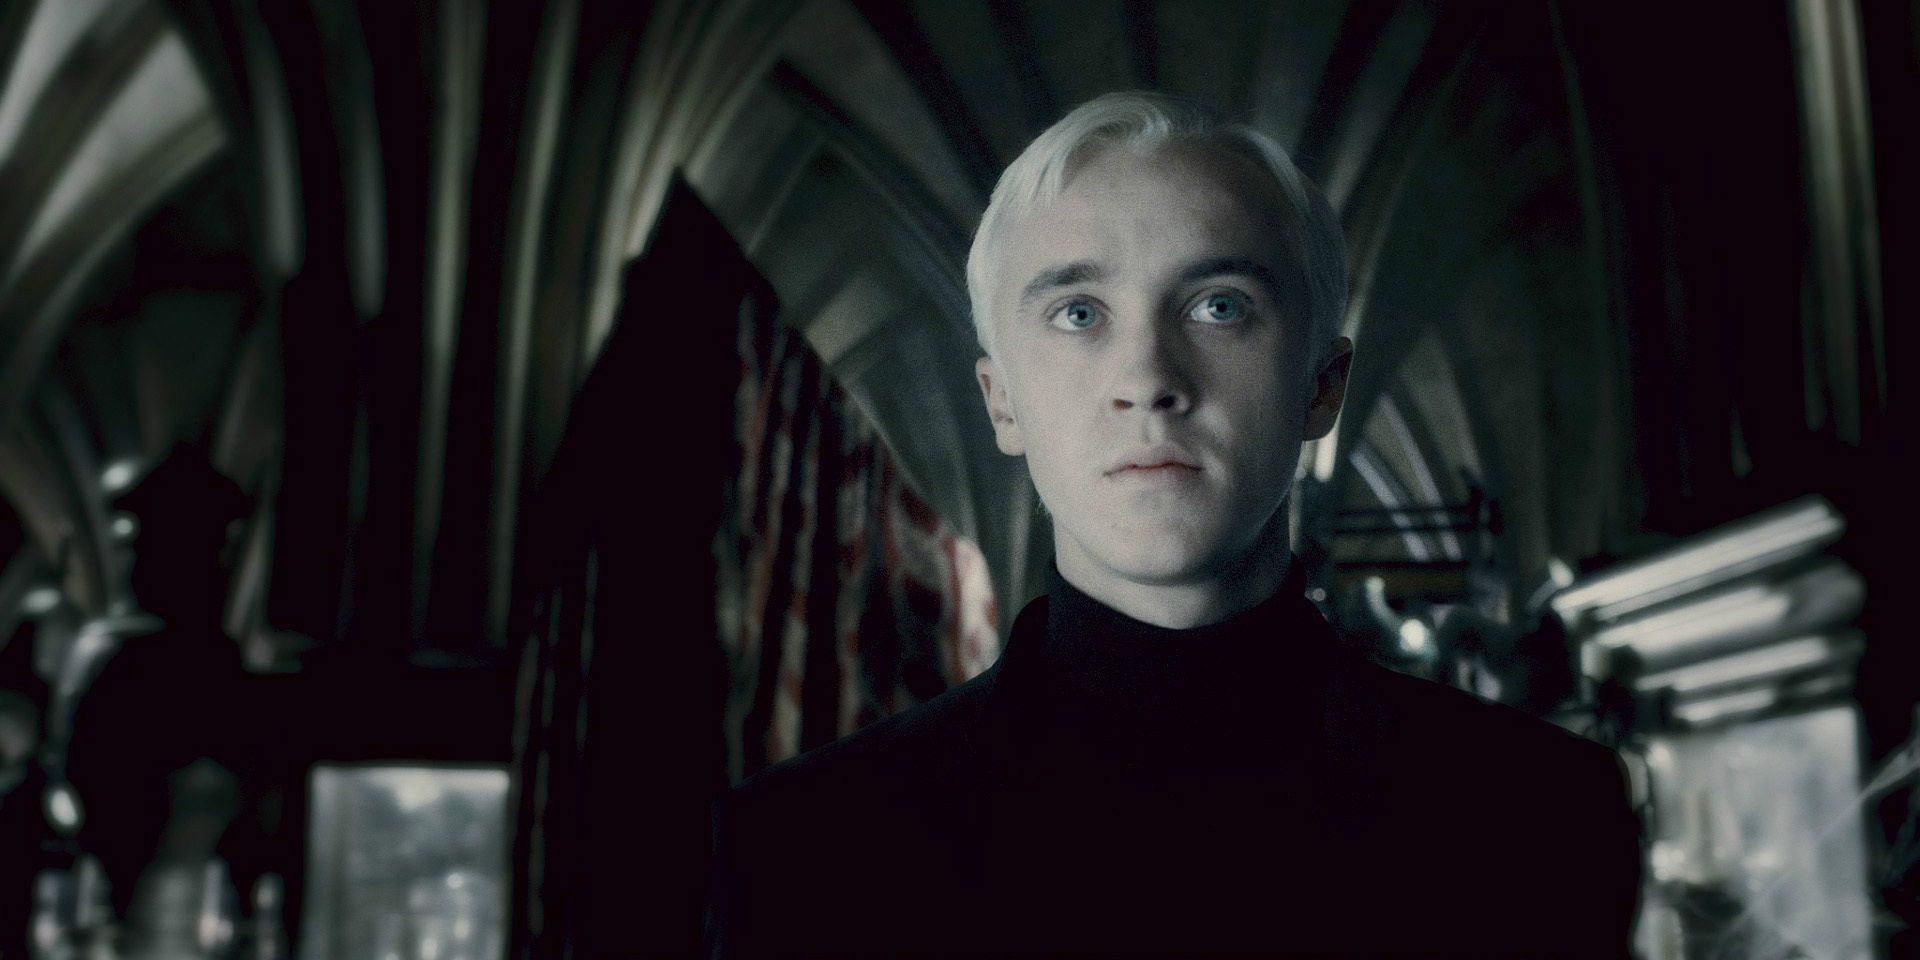 Harry Potter 5 Reasons Malfoy Was The Most Interesting Slytherin (& 5 Reasons Crabbe & Goyle Were)